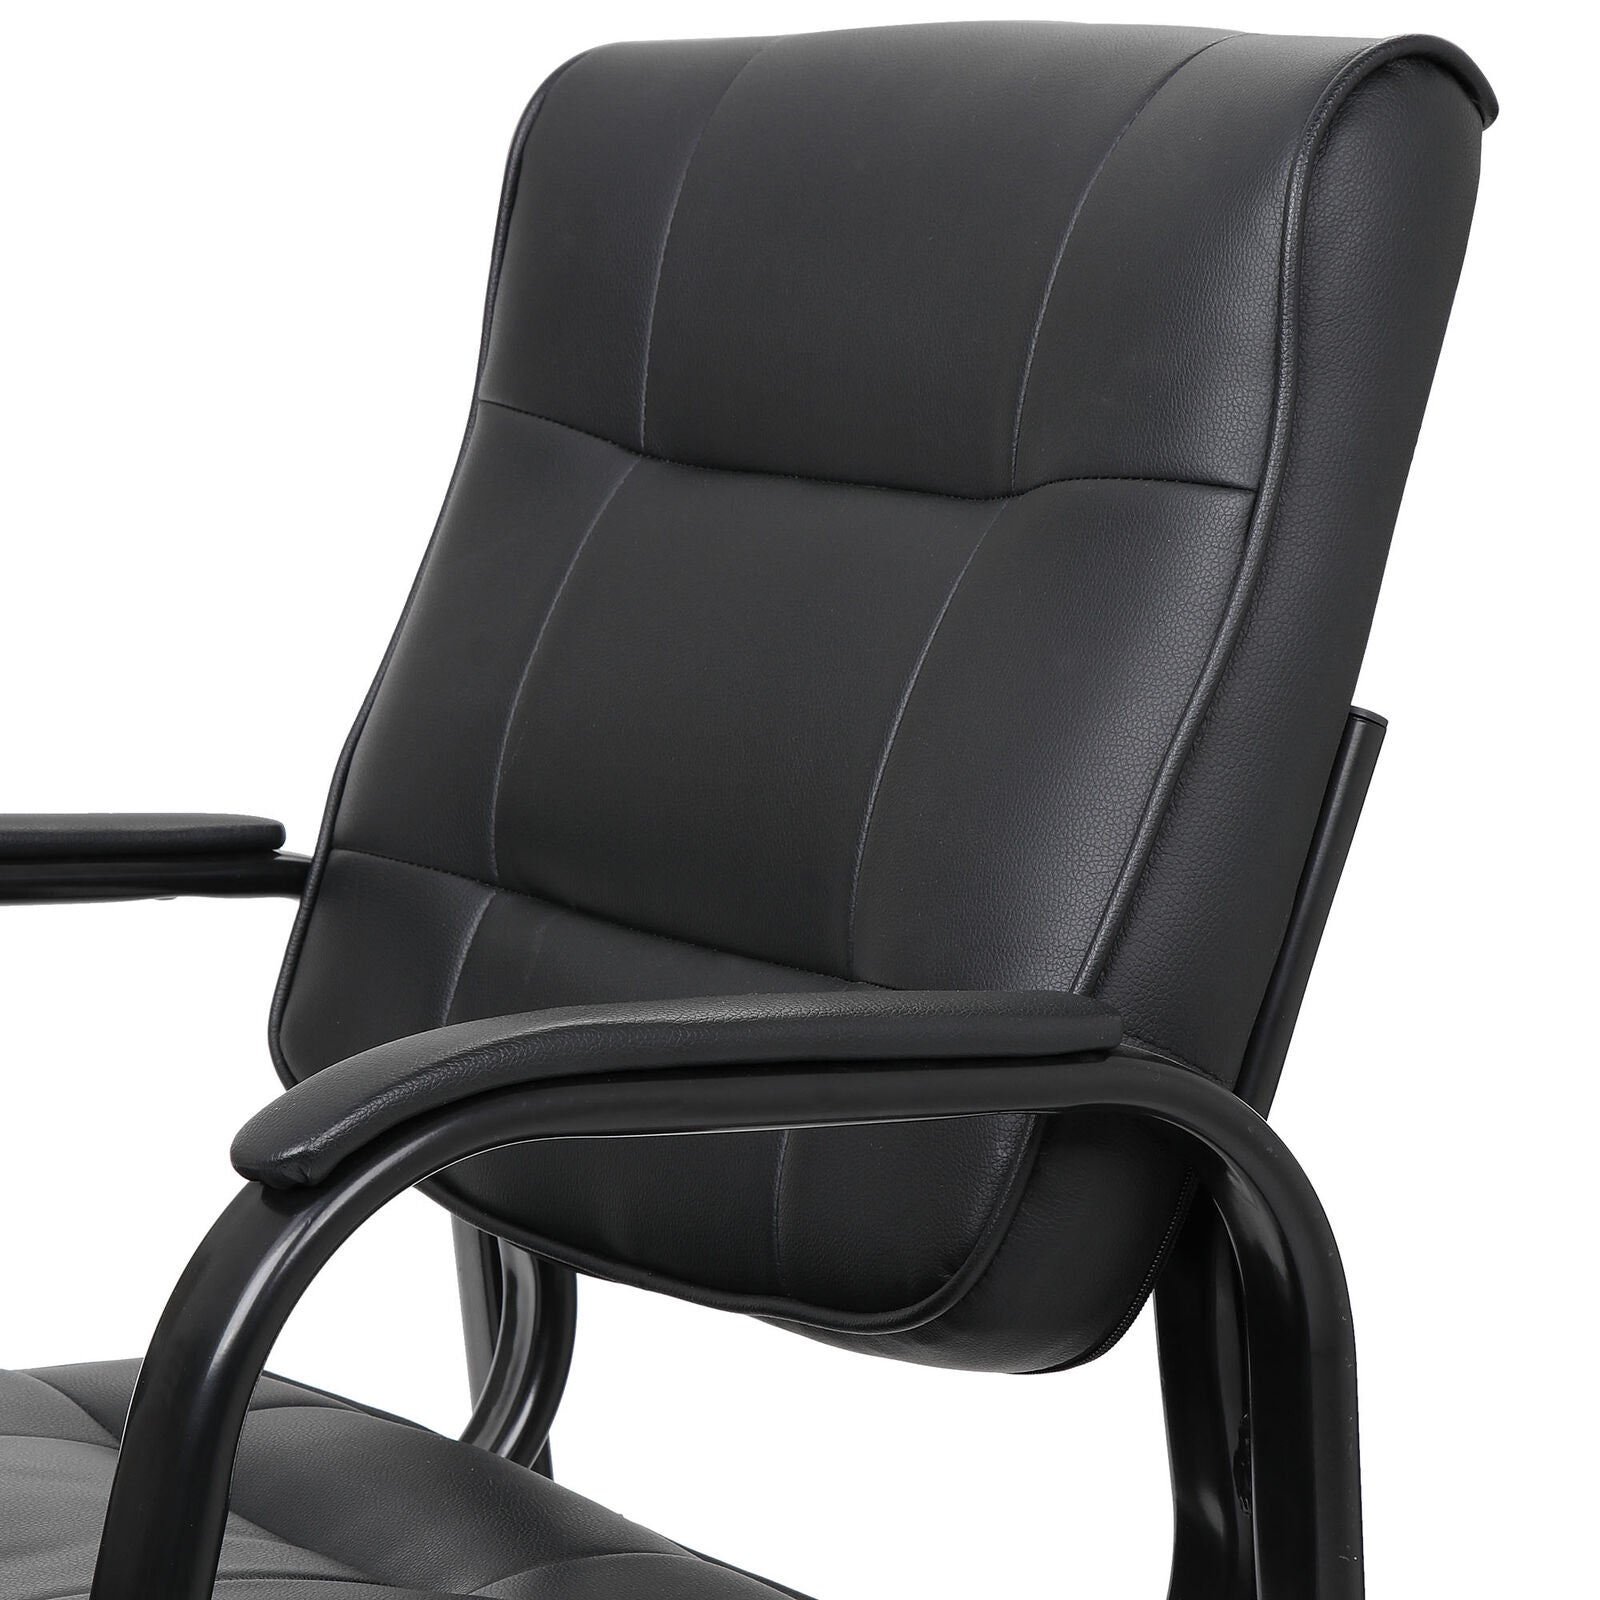 2PCS Black Leather Guest Chair Reception Waiting Room Office Desk Side Chairs